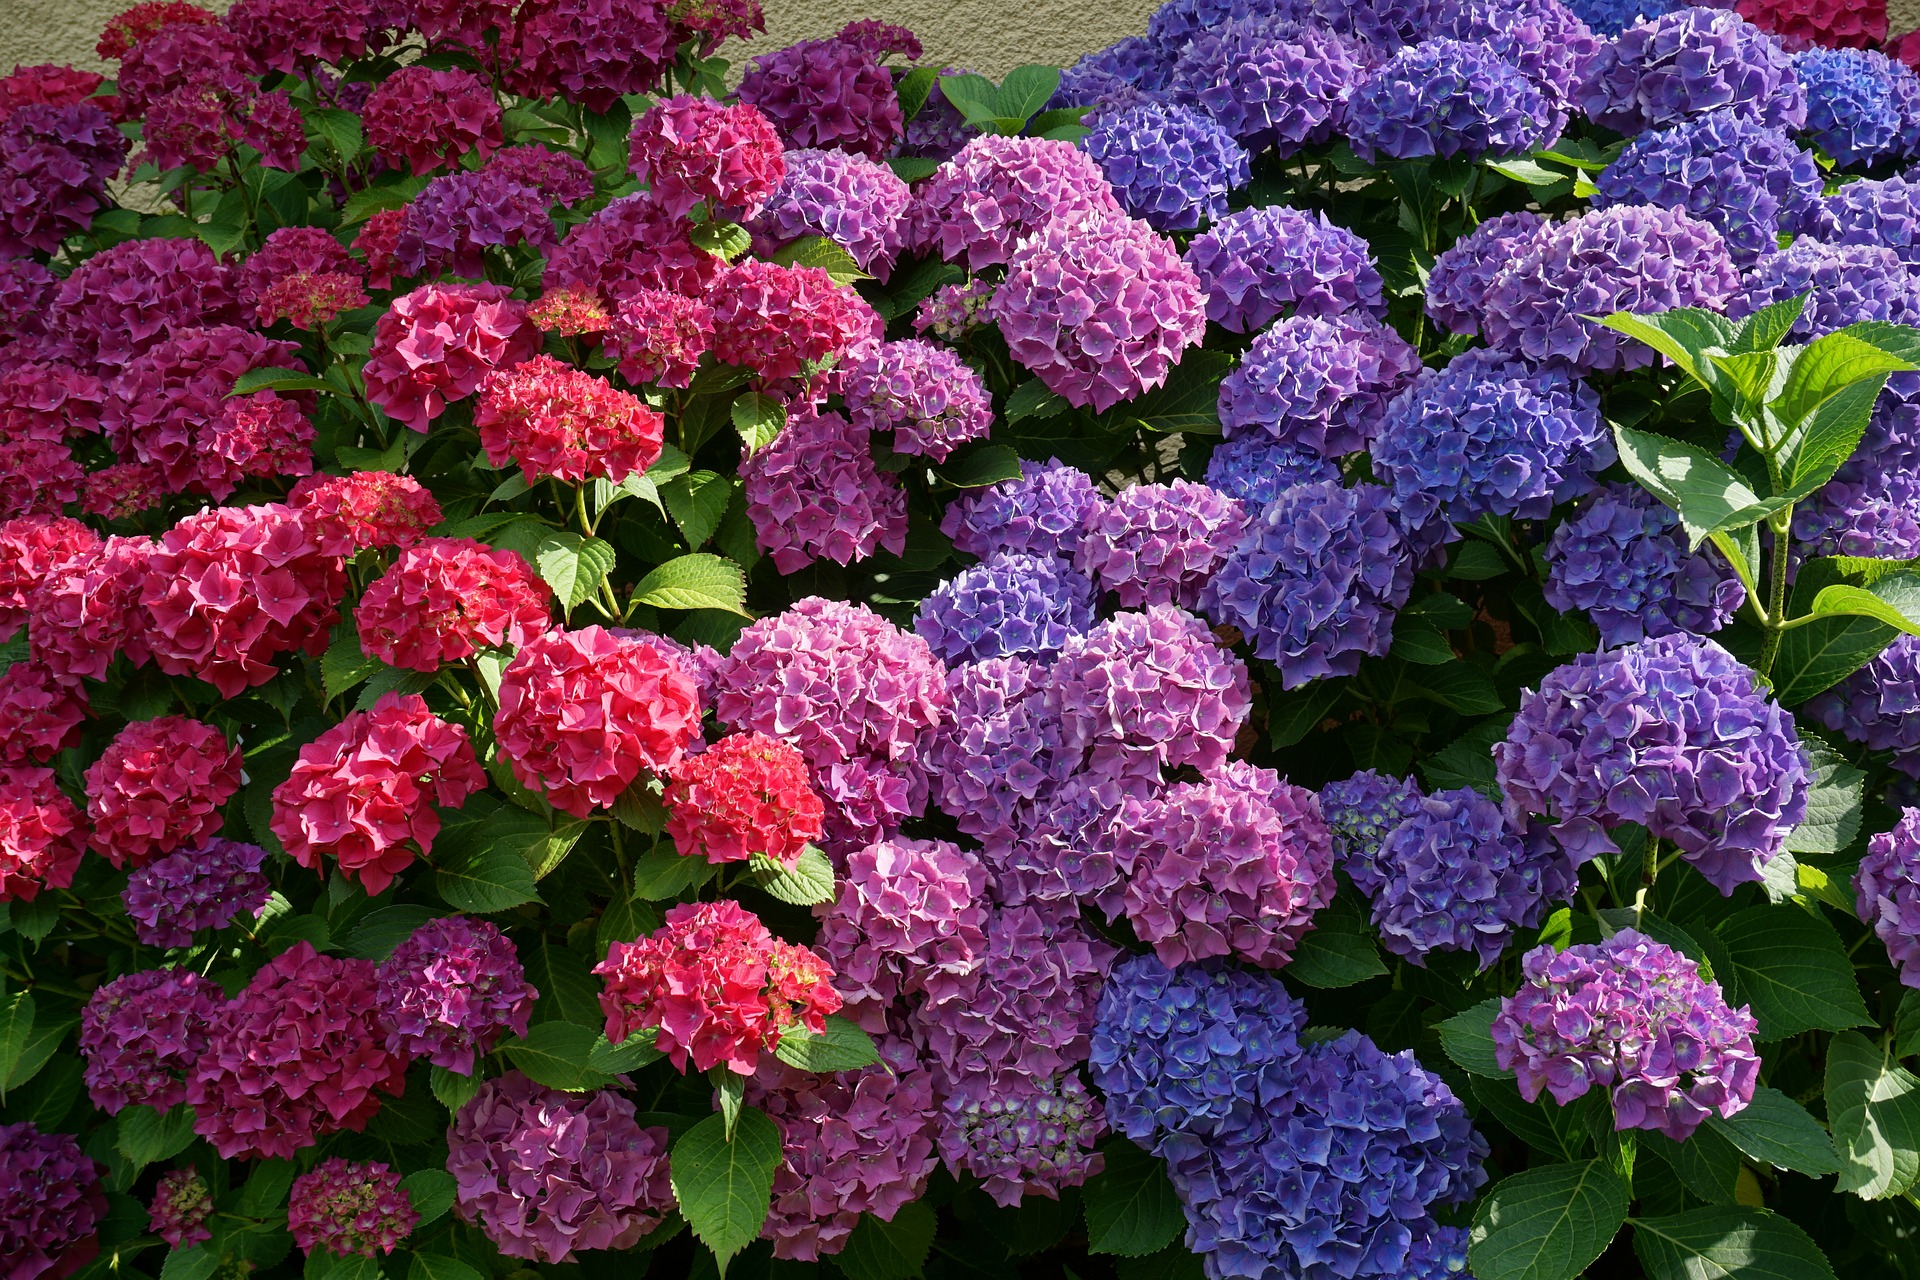 Real purple hydrangea flower with black background